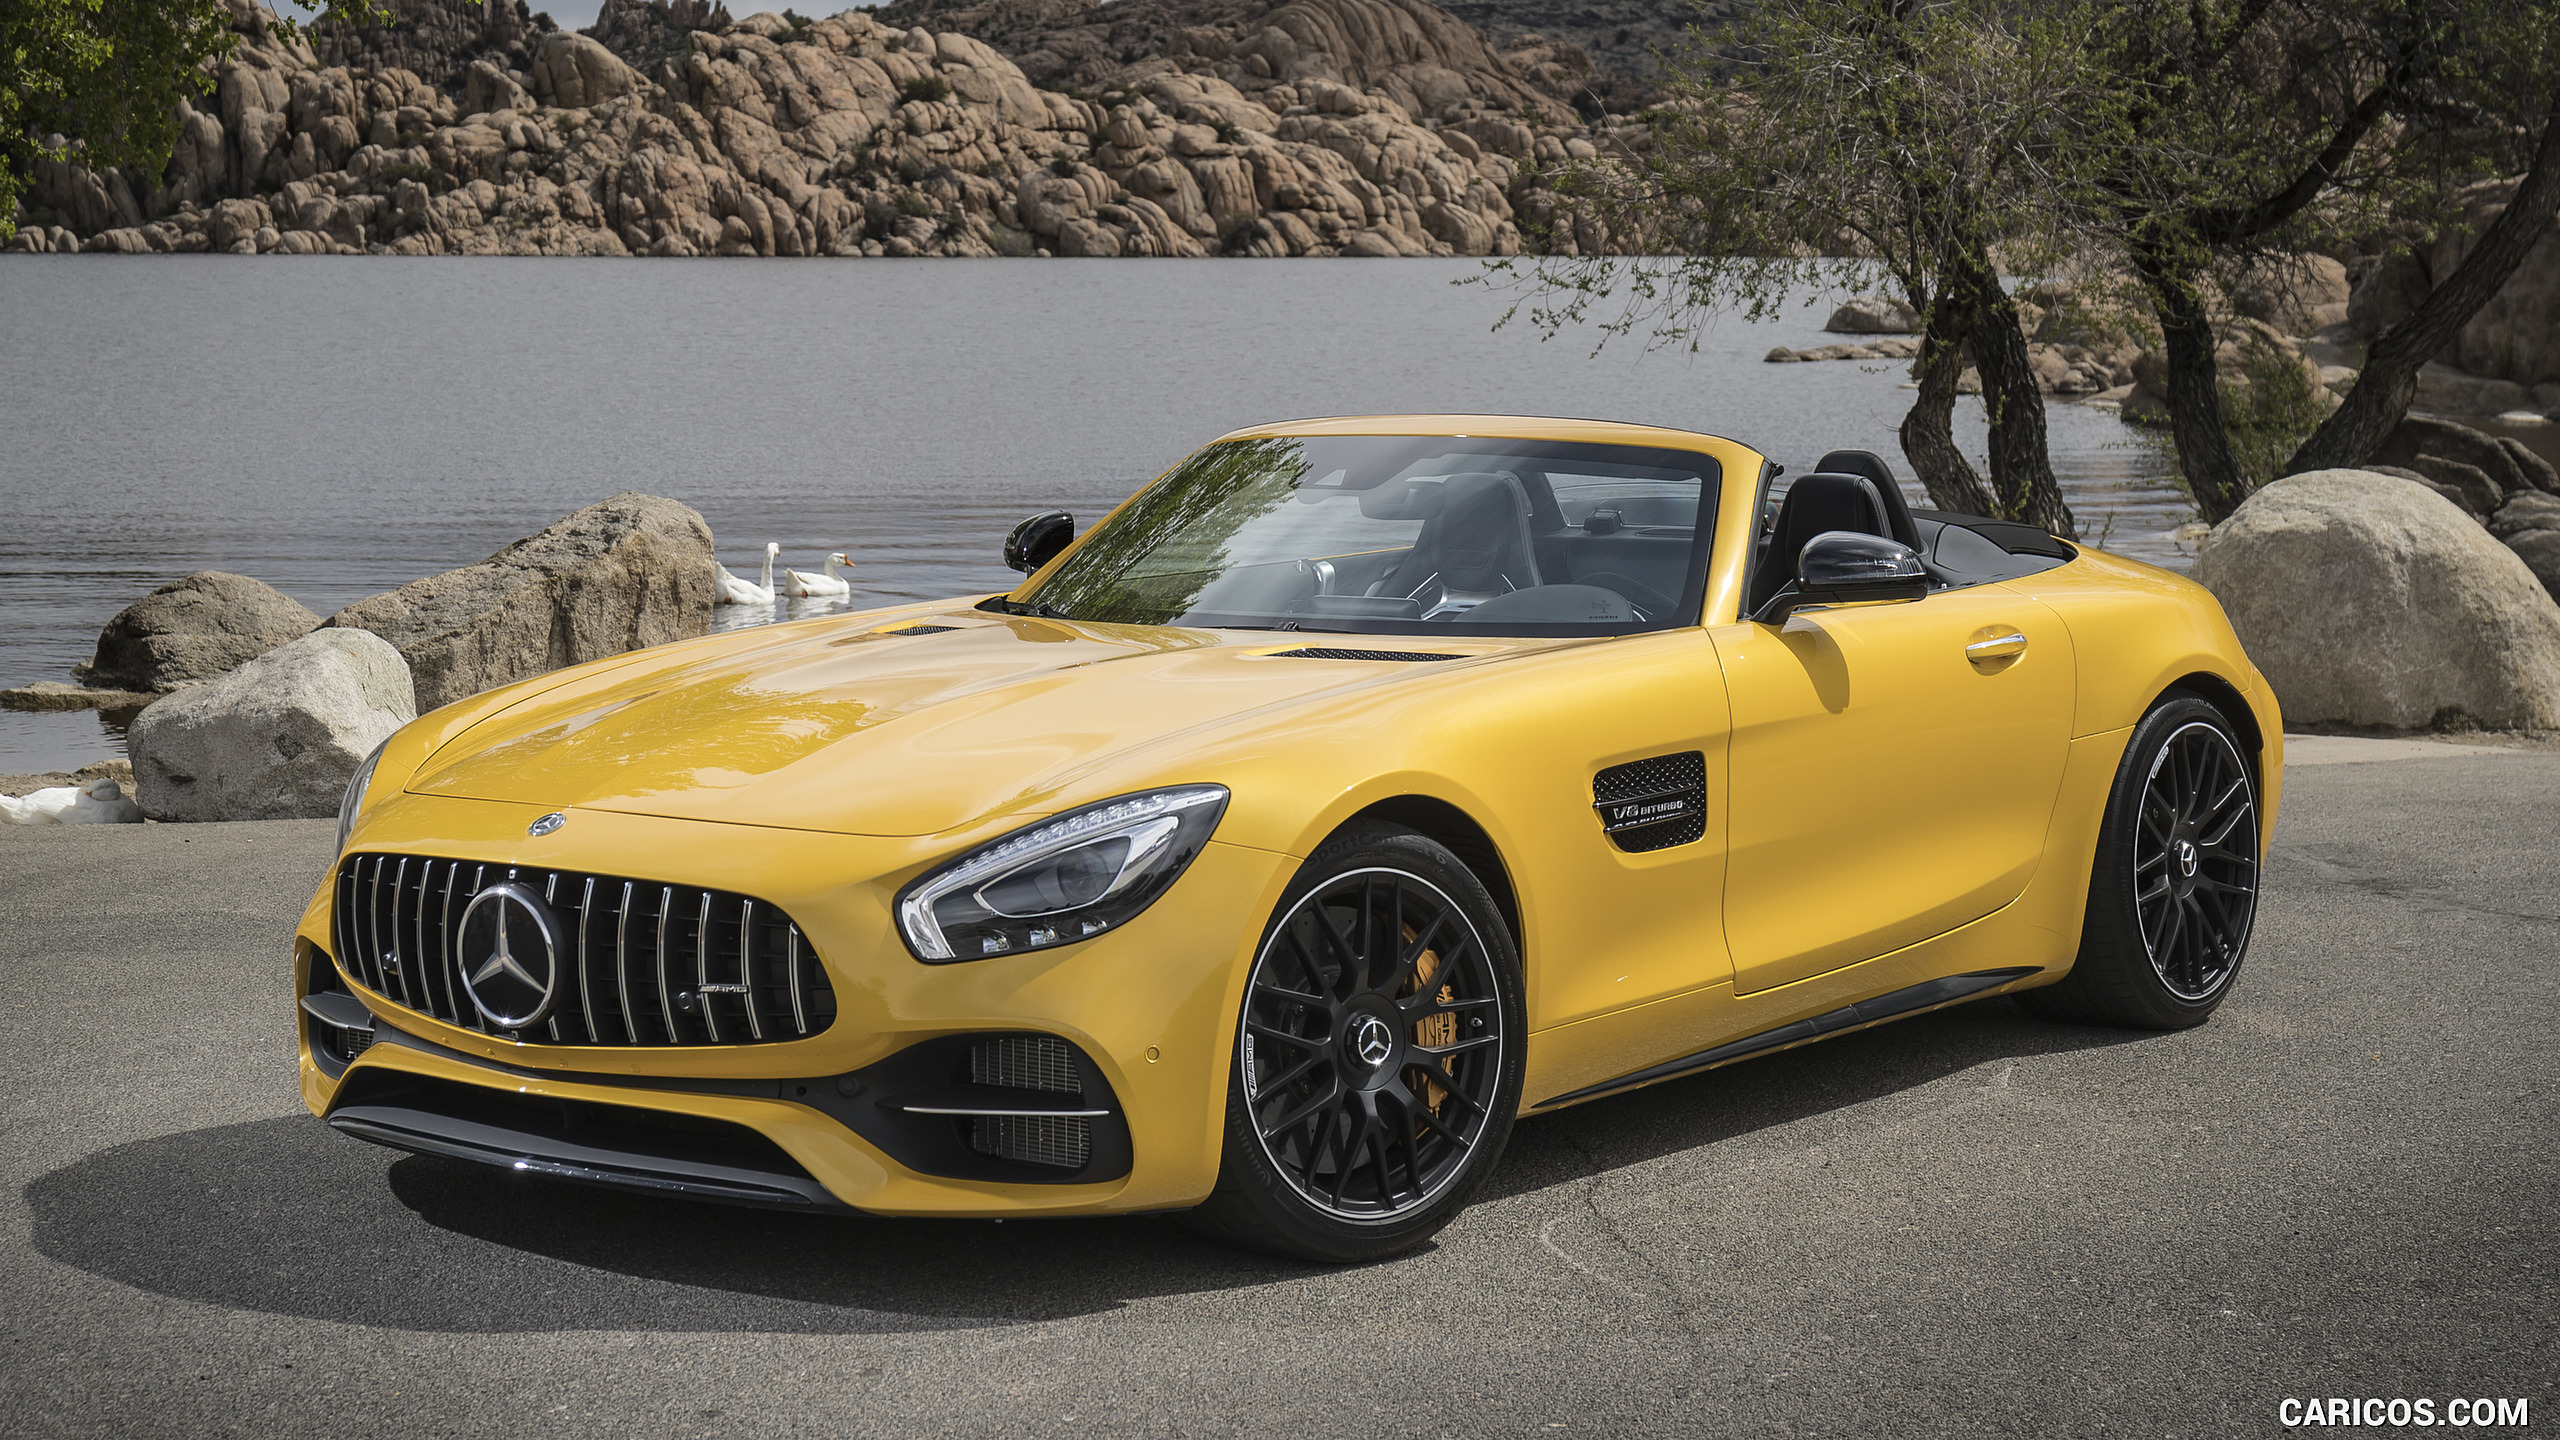 2018 Mercedes-AMG GT C Roadster - Front Three-Quarter, #221 of 350